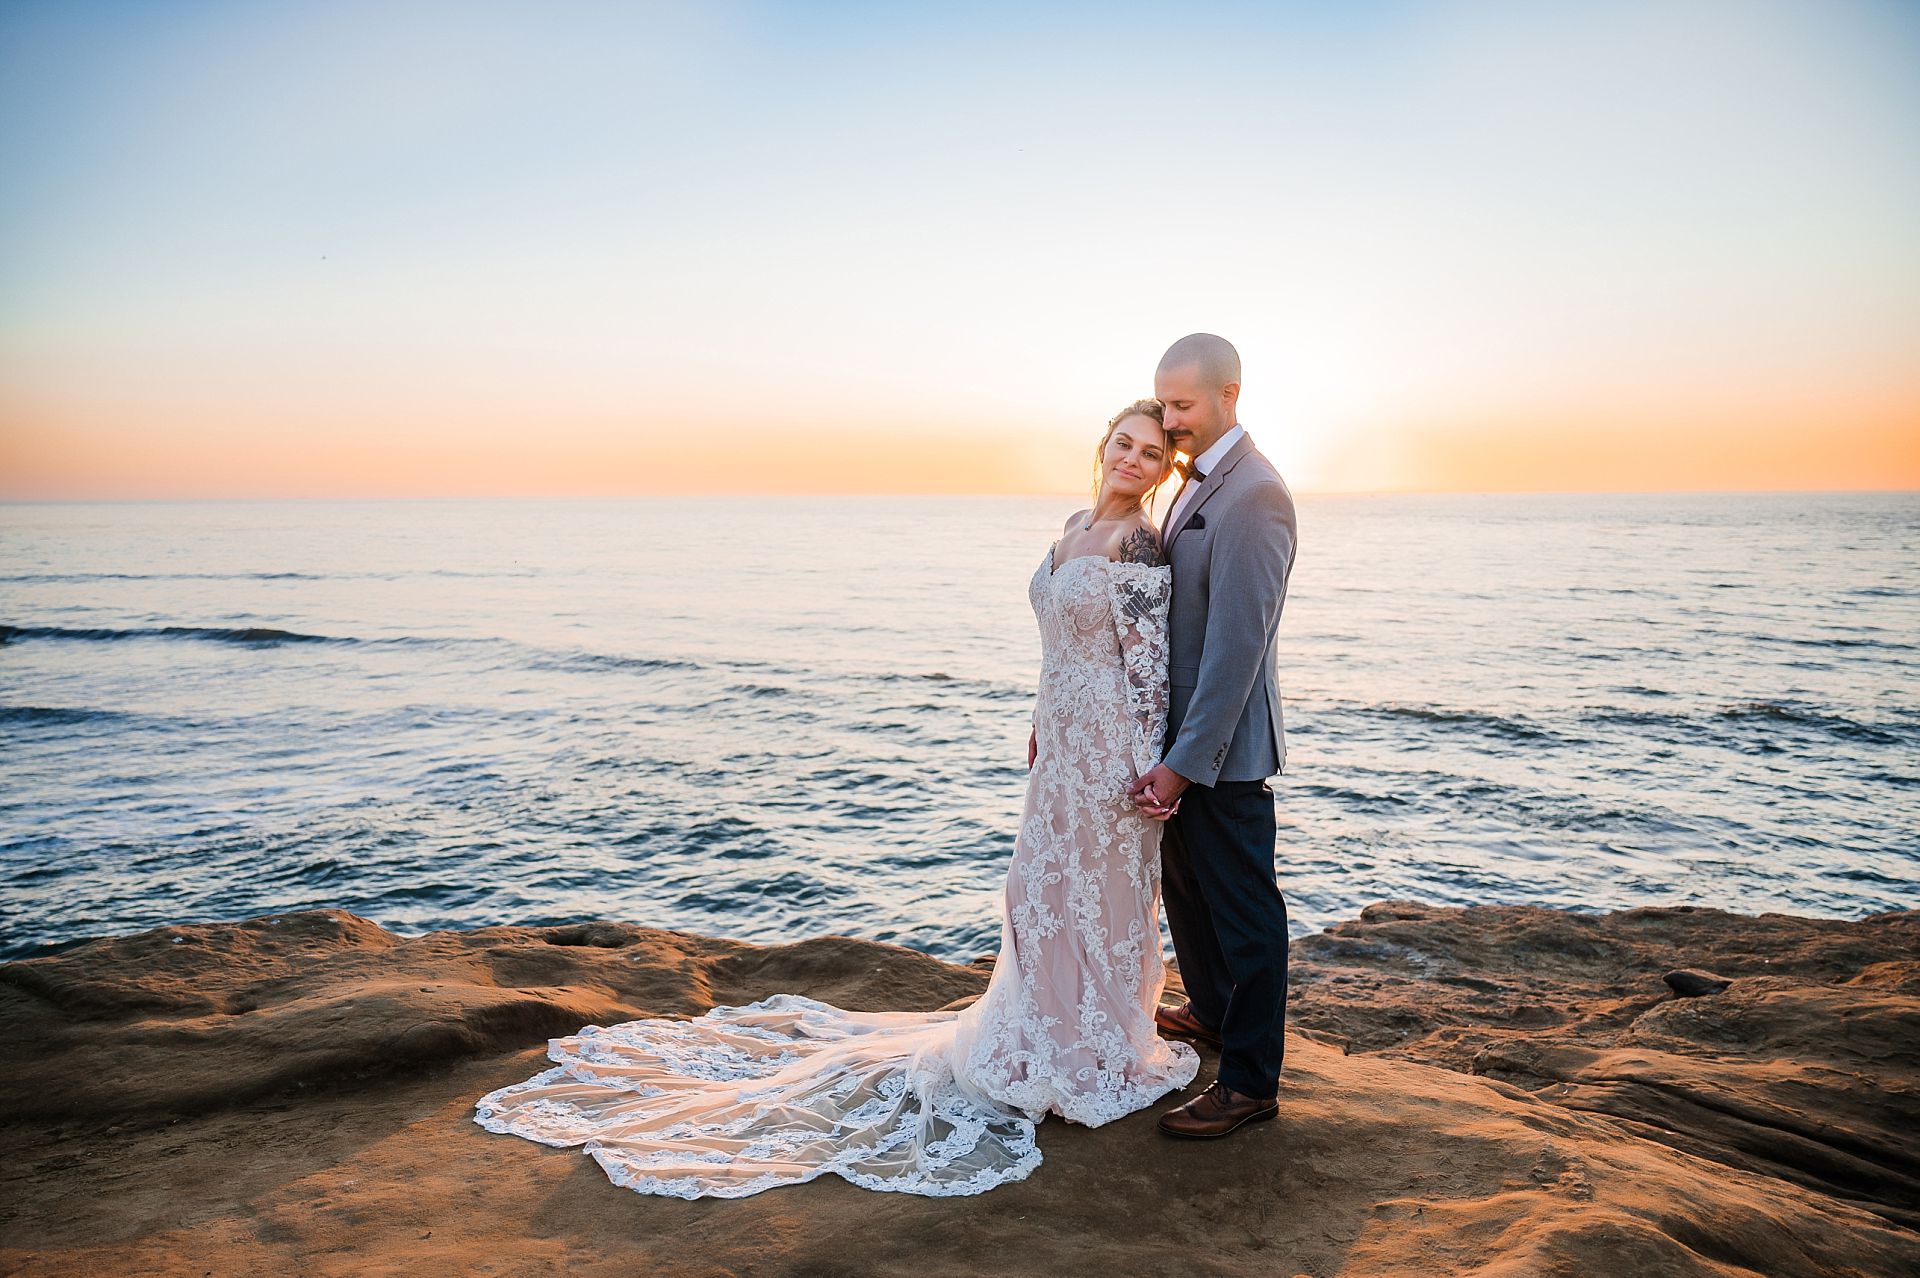 Sunset Cliffs wedding with Pacific Ocean visible in the background